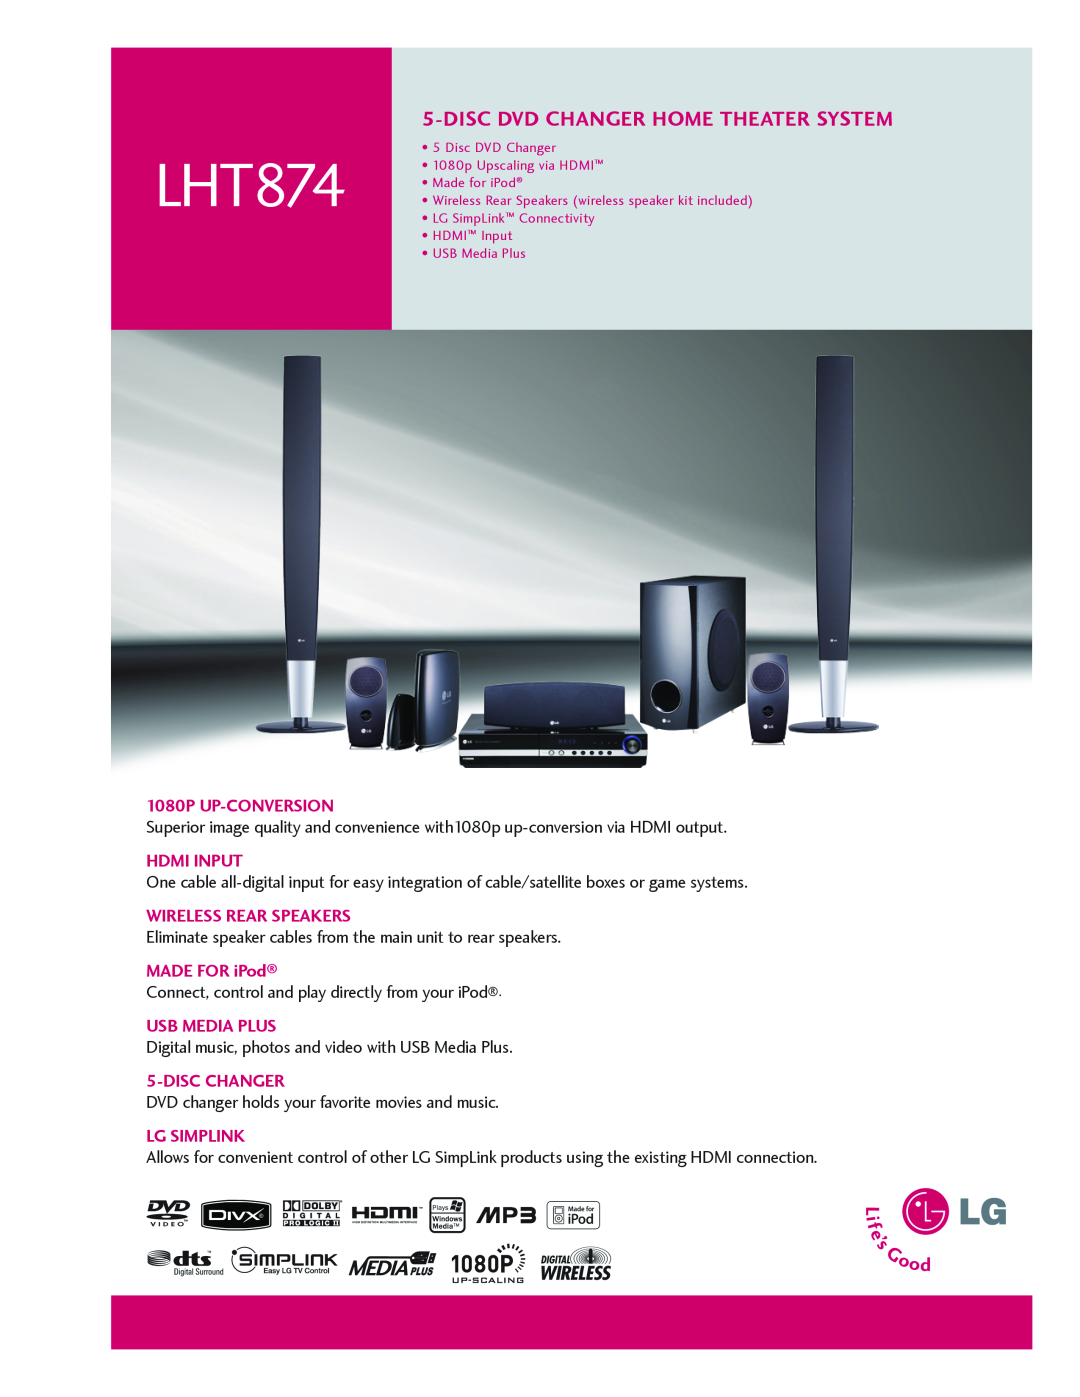 LG Electronics LHT874 manual Discdvd Changer Home theater system, 1080p UP-CONVERSION, Hdmi Input, Wireless Rear Speakers 